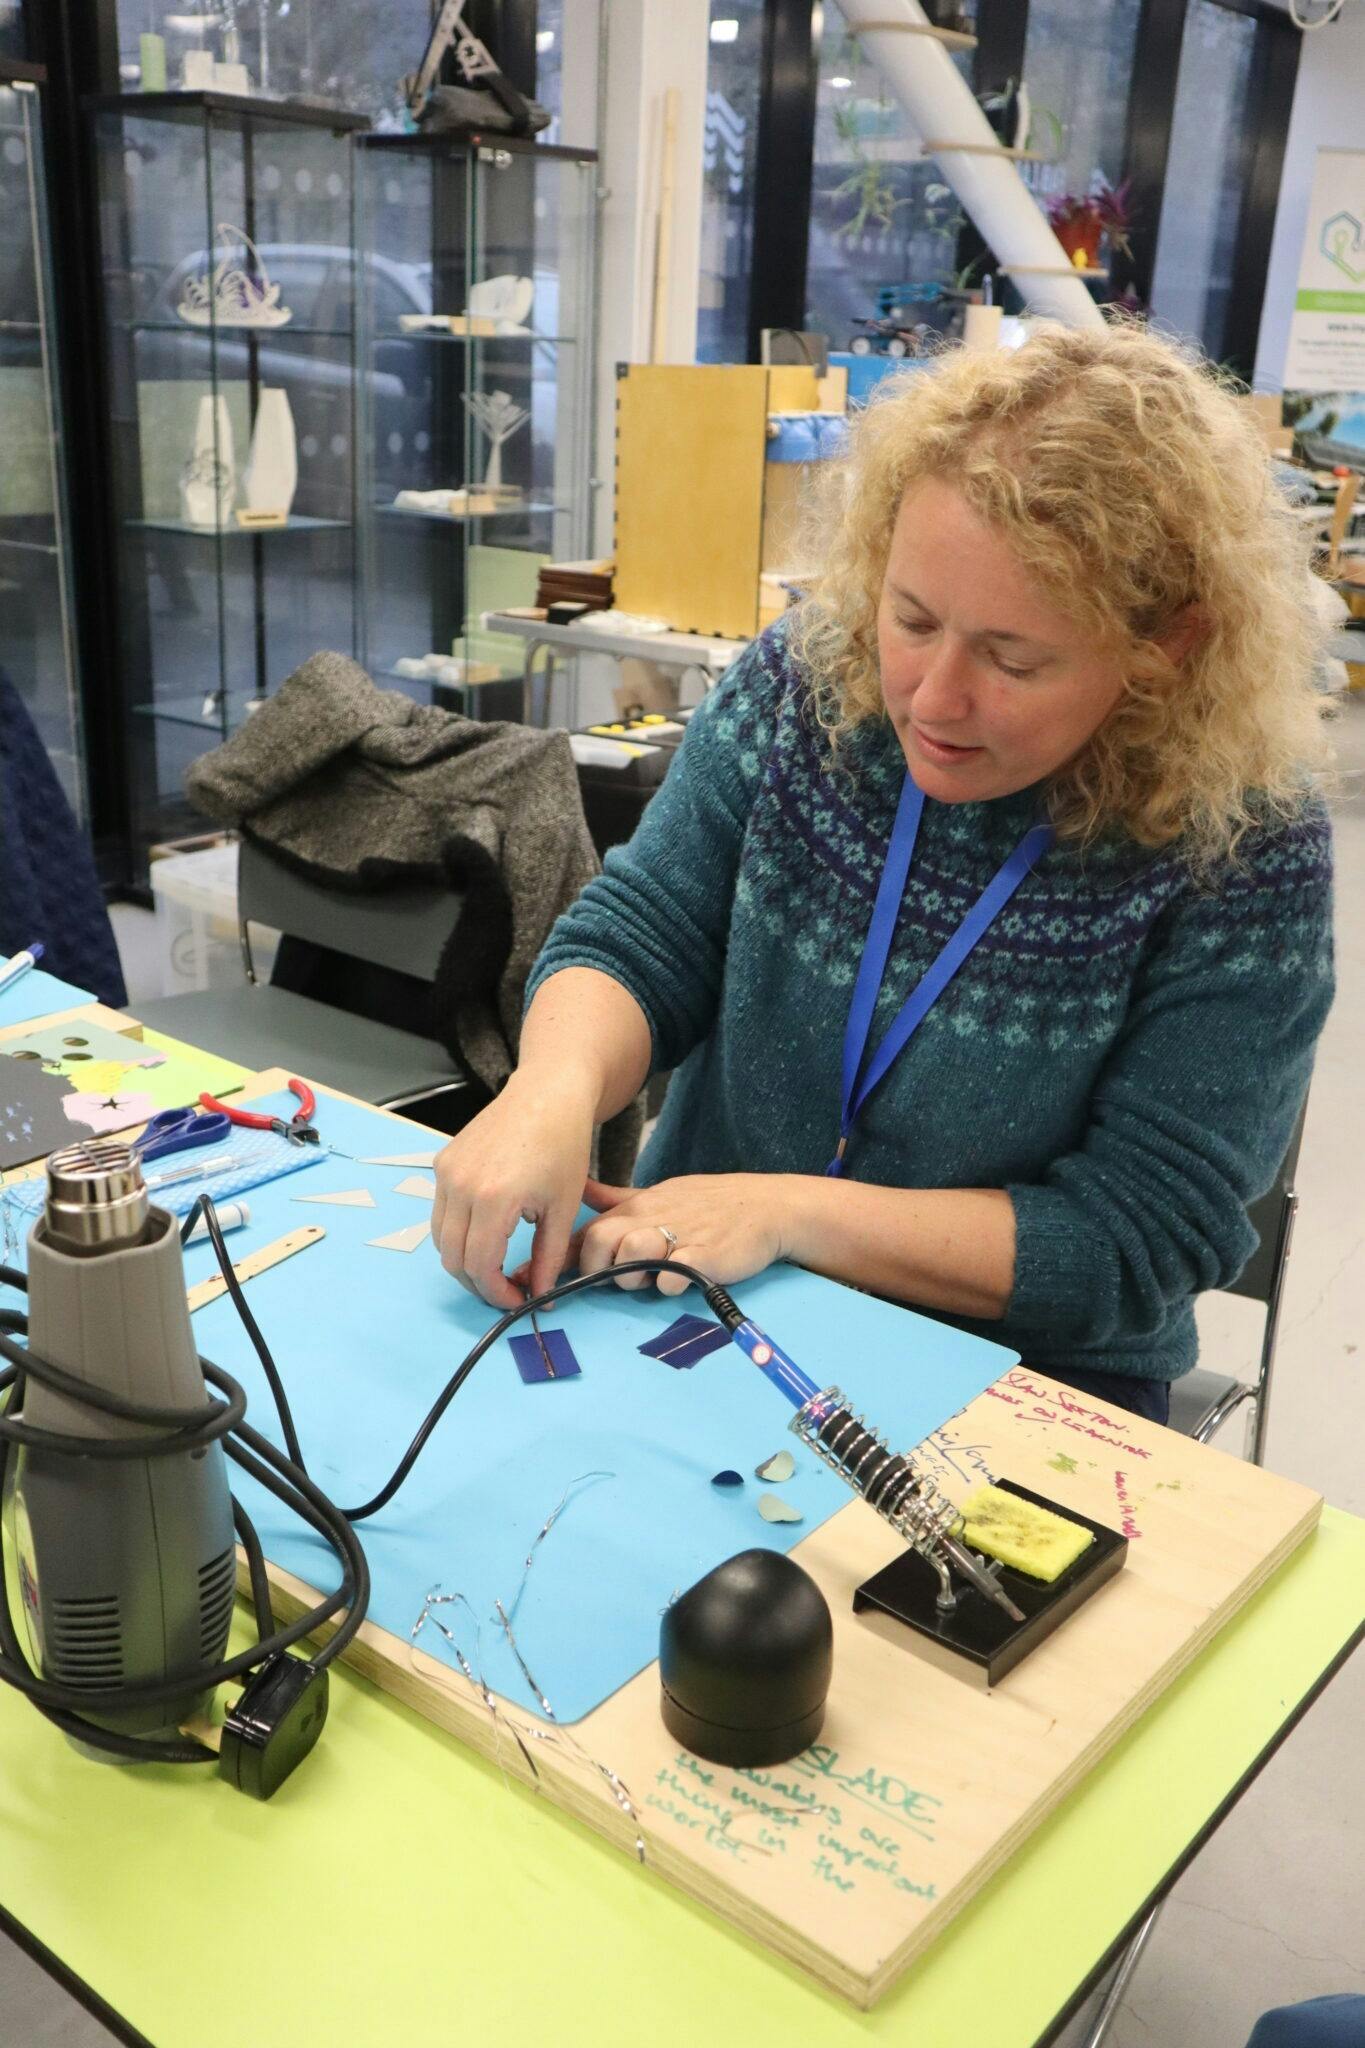 Chloe Uden founder of Art and Energy demonstrating how to solder the solar cells